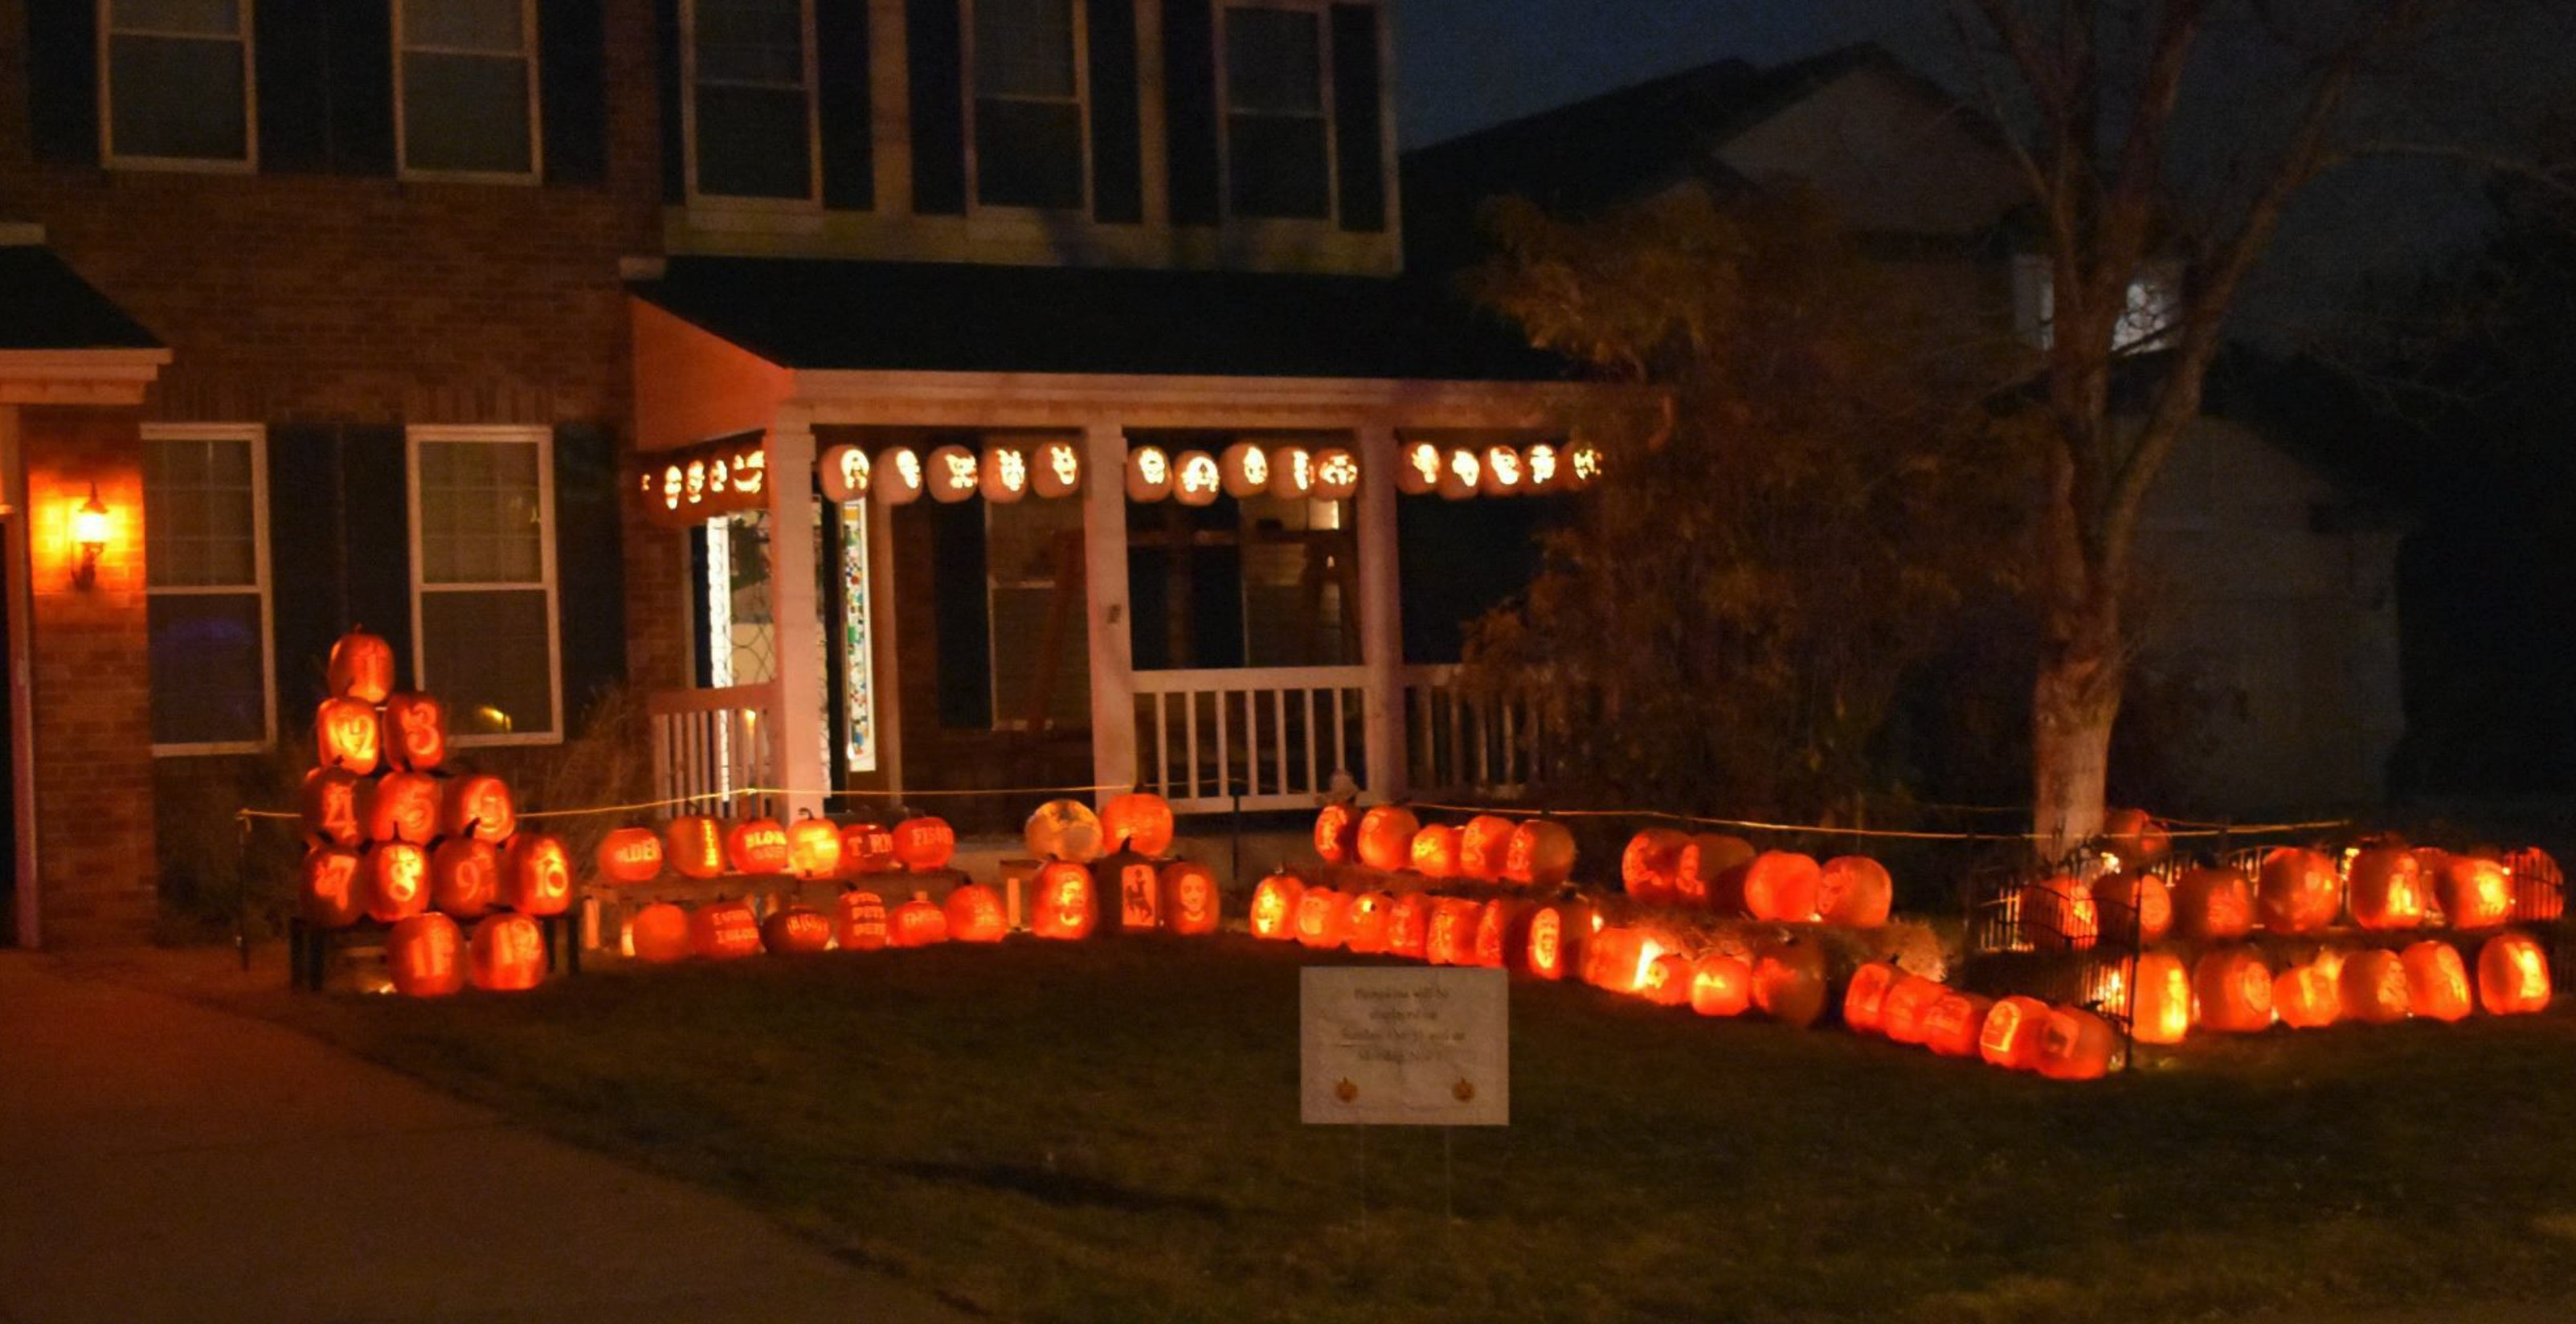 The display of carved pumpkins in front of Dave Cunningham's house is impressive. He works hundreds of hours for the four-hour display.